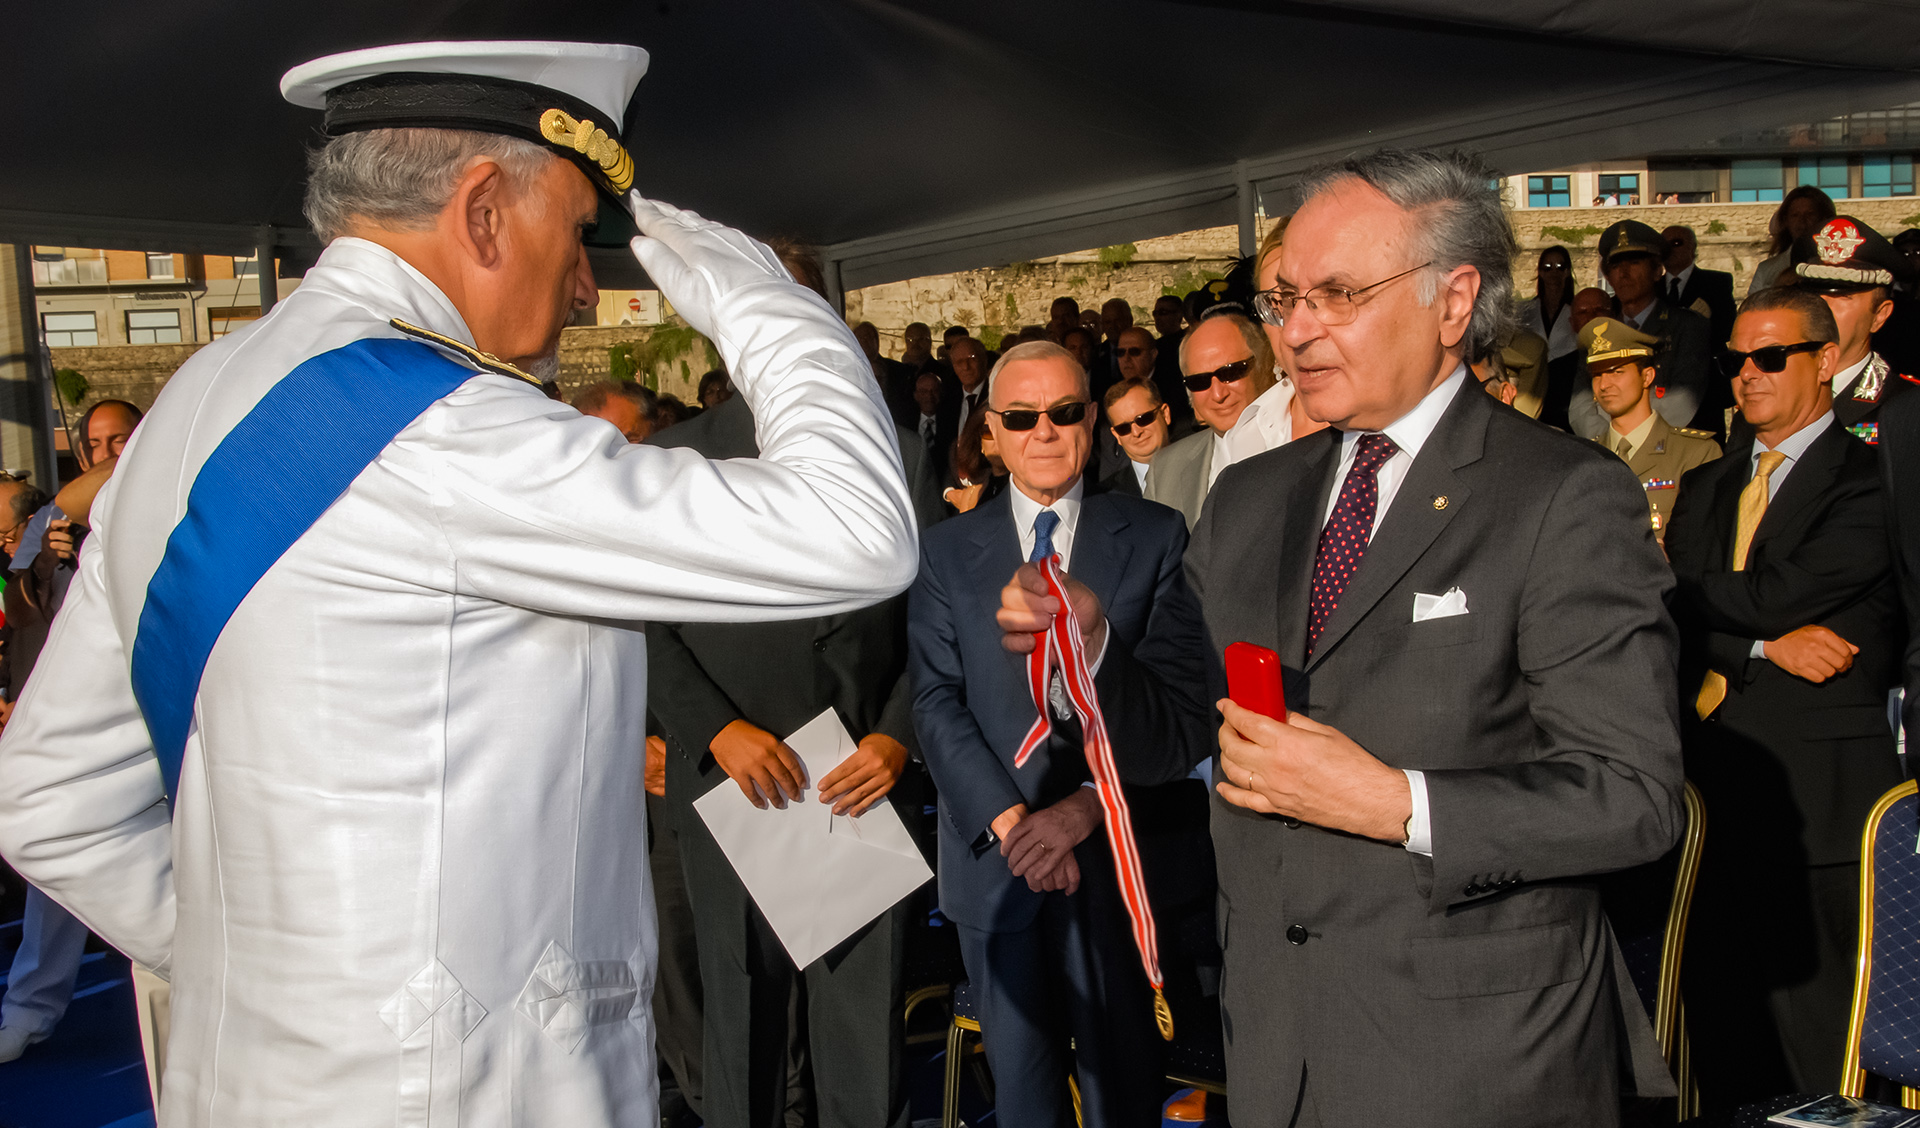 The Italian coast guards awarded the Order’s gold medal